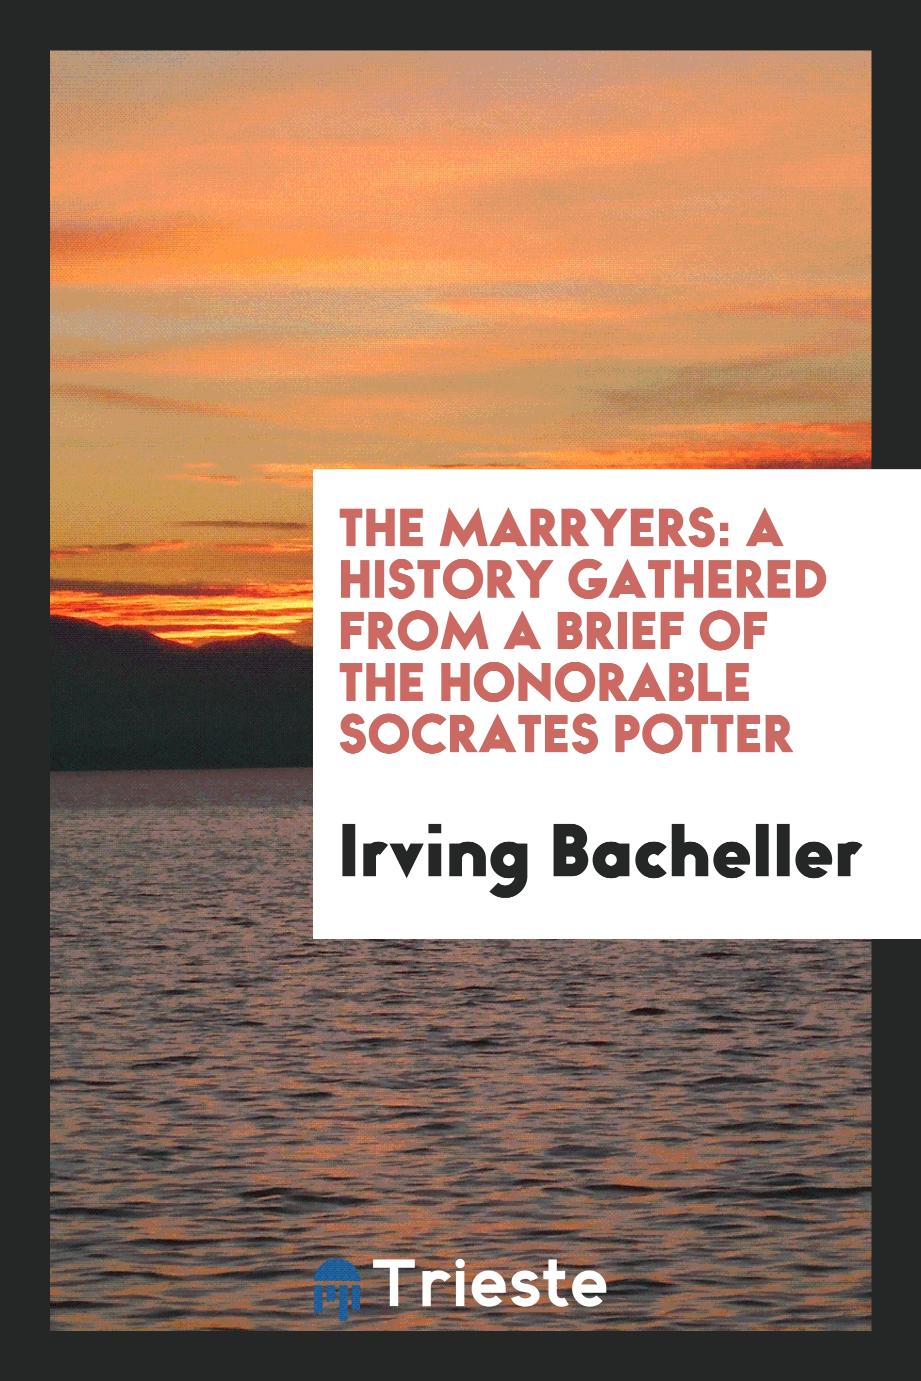 The marryers: a history gathered from a brief of the Honorable Socrates Potter